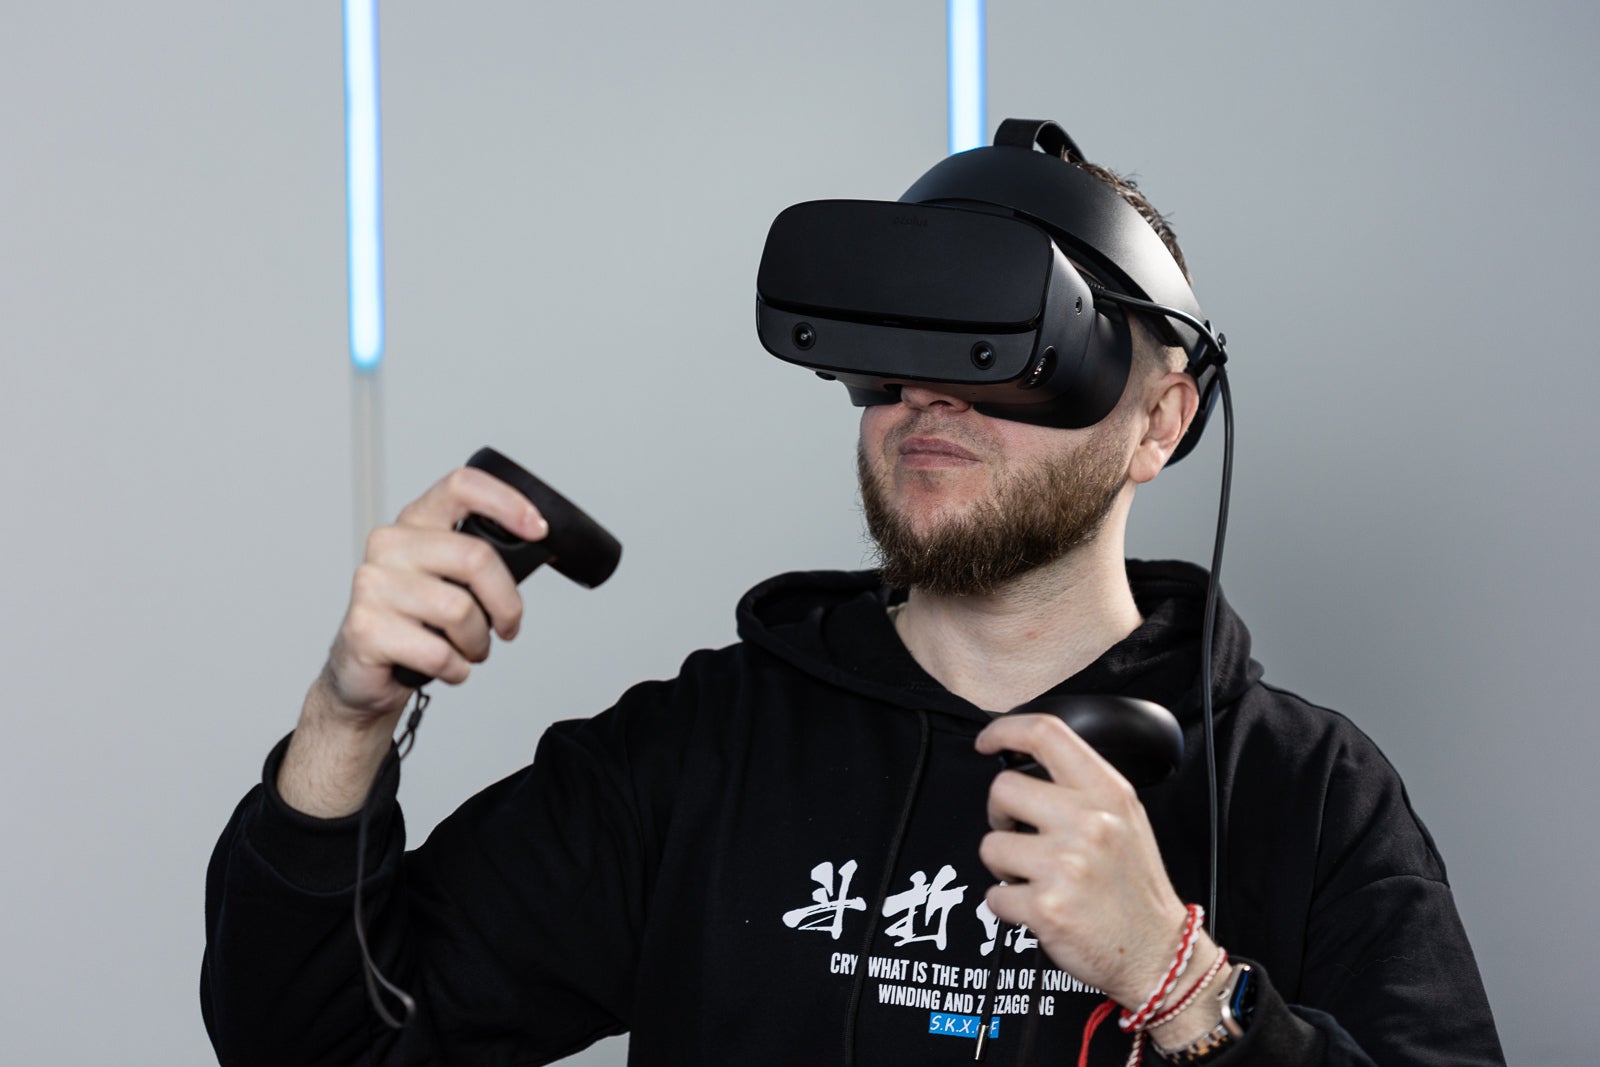 Meta Quest 2 vs Rift S: Which one should buy? The standalone VR headset or the PCVR-only - PhoneArena